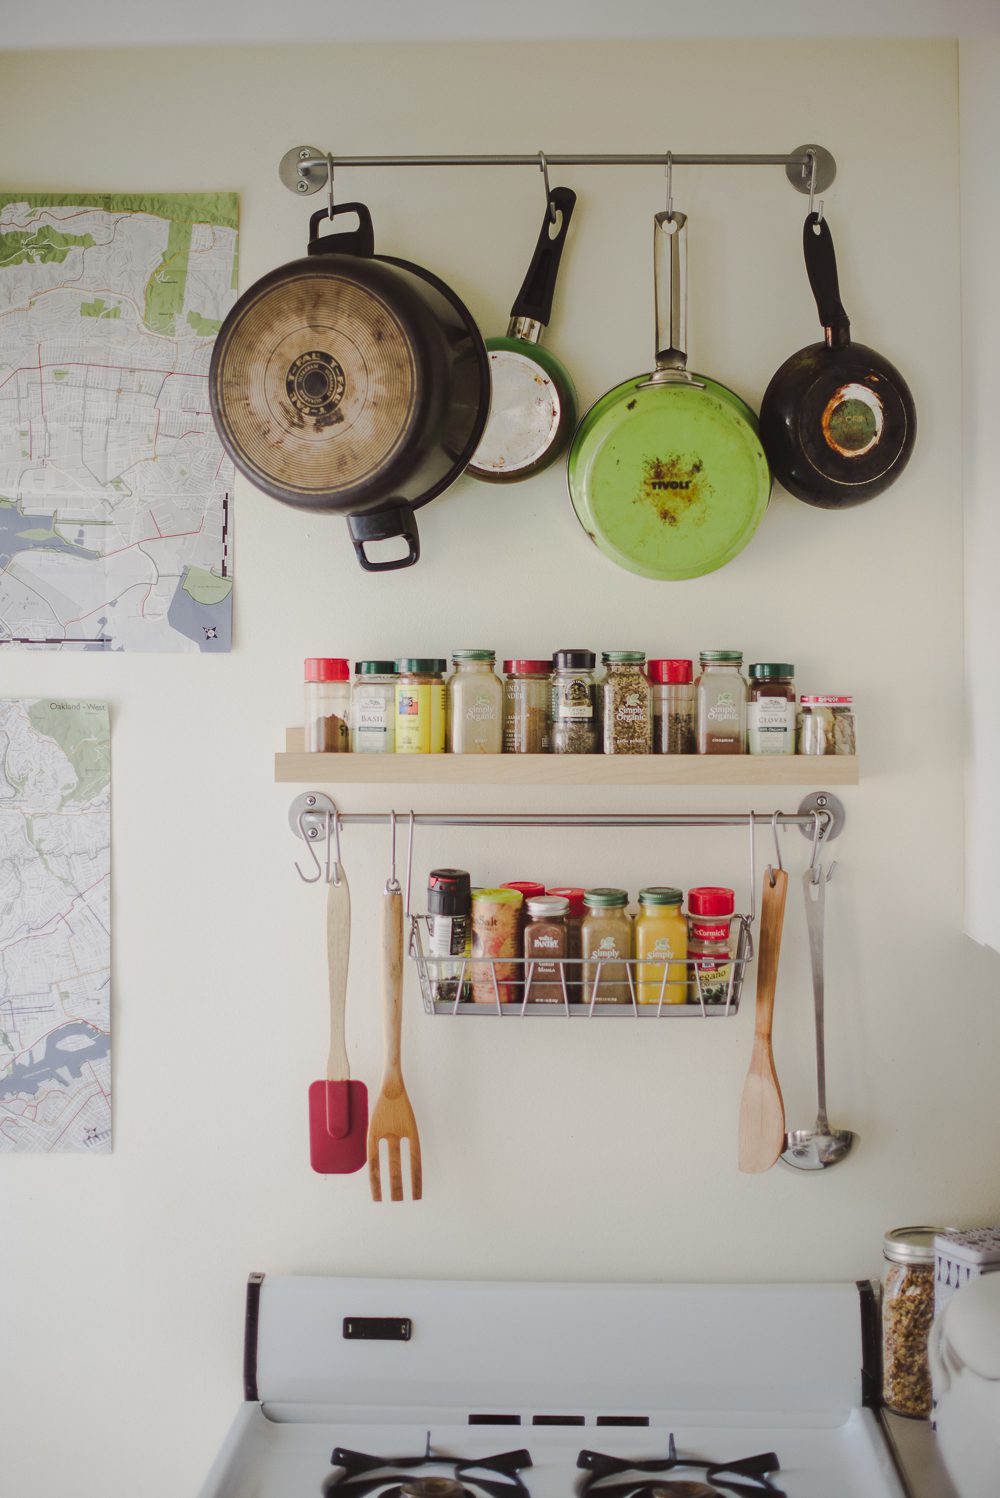 spices and pans hanging in kitchen